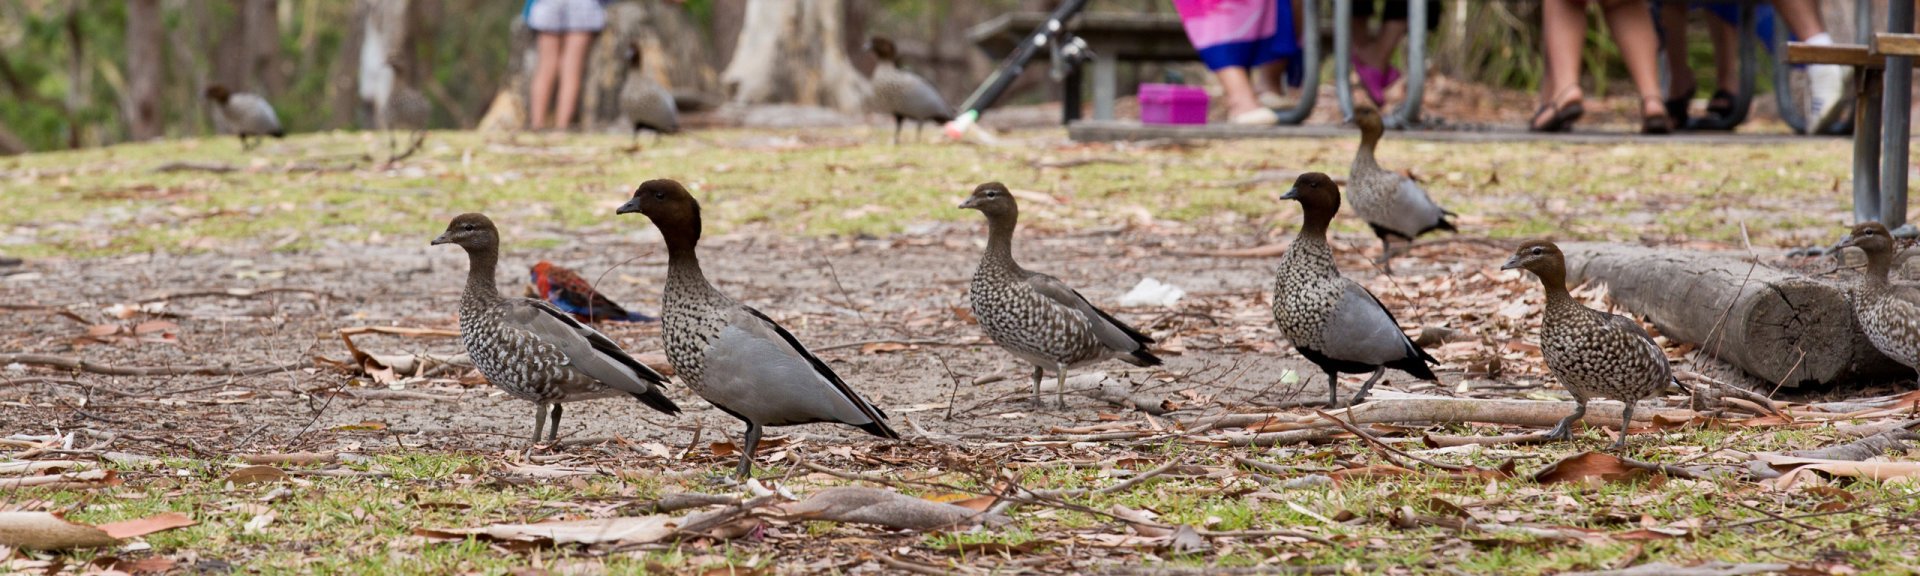 Ducks at Green Patch campground.